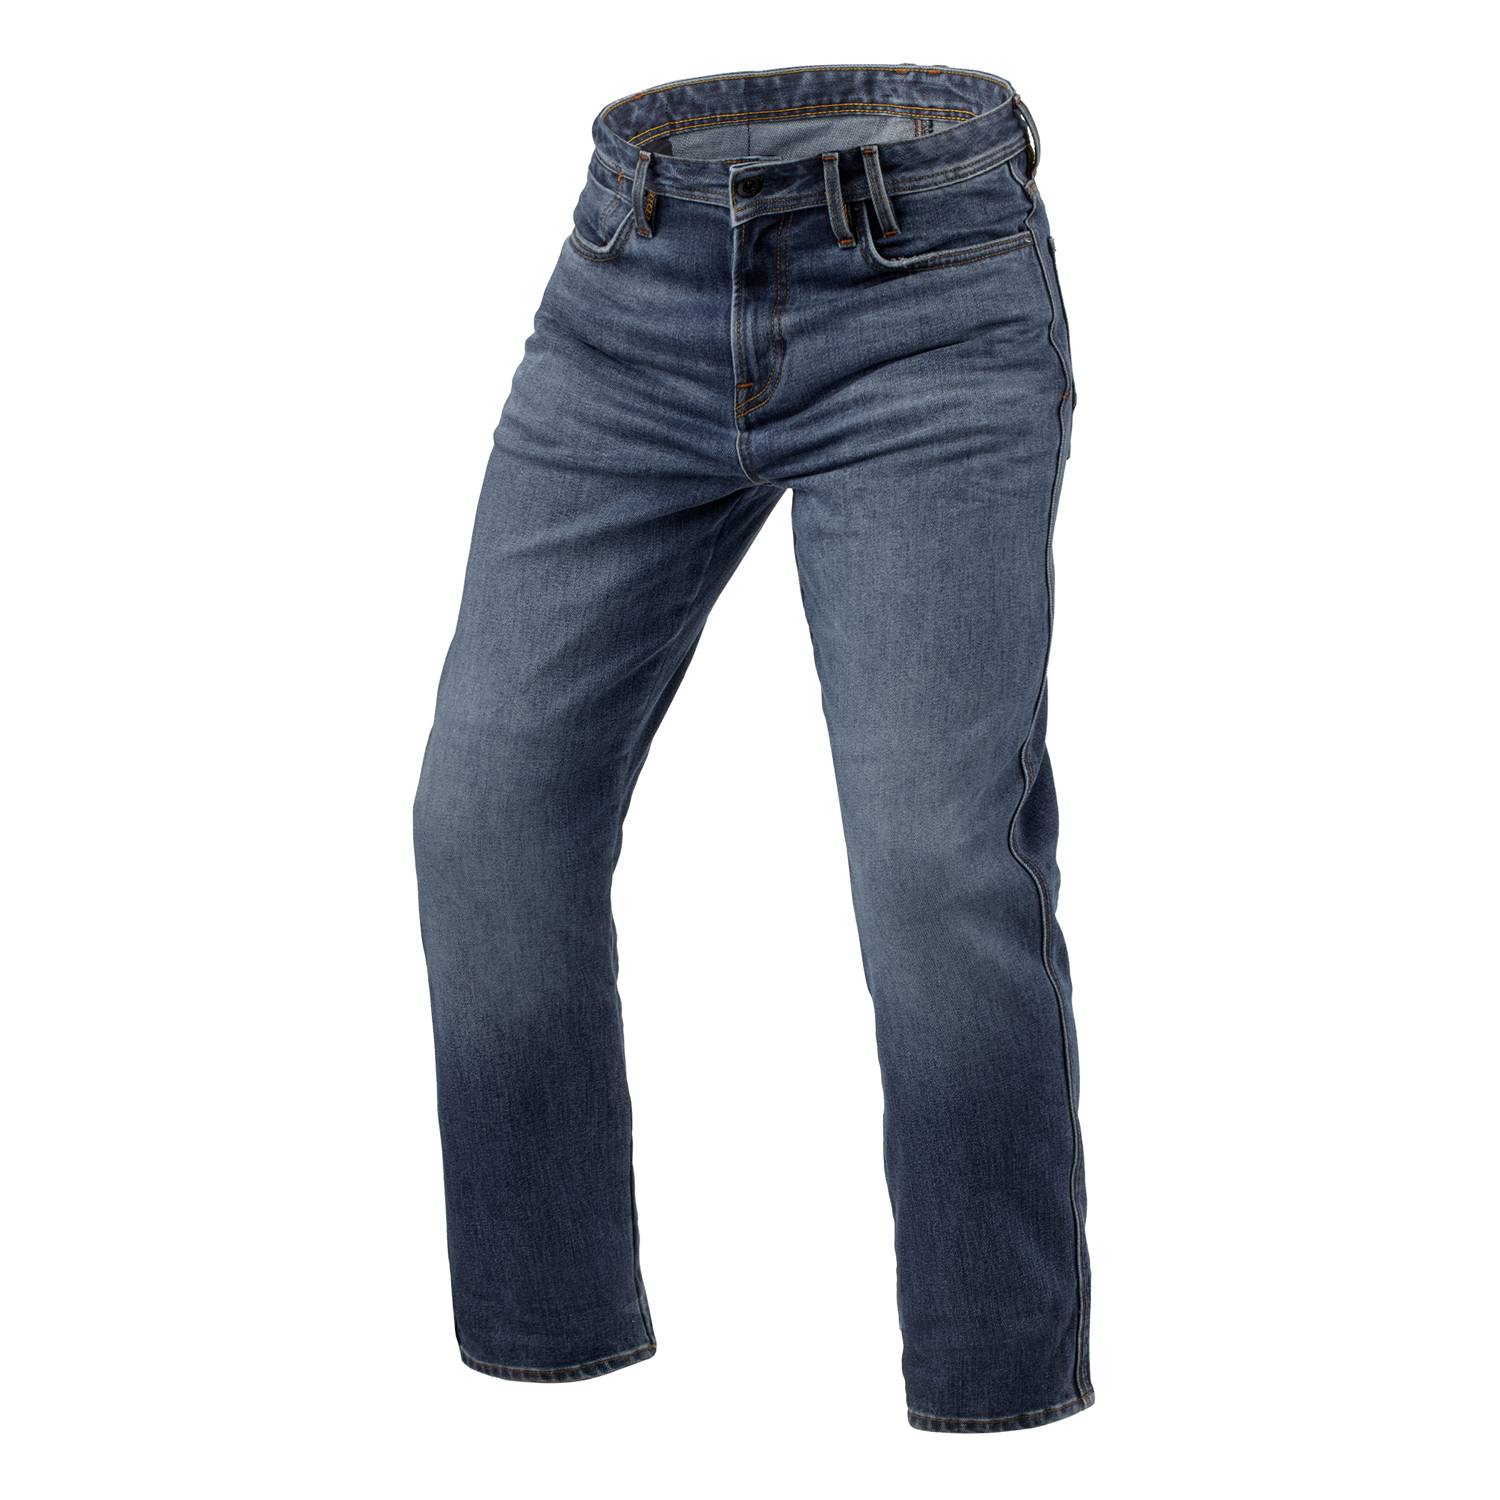 Image of EU REV'IT! Jeans Lombard 3 RF Mid Blue Stone L32 Motorcycle Jeans Taille L32/W32